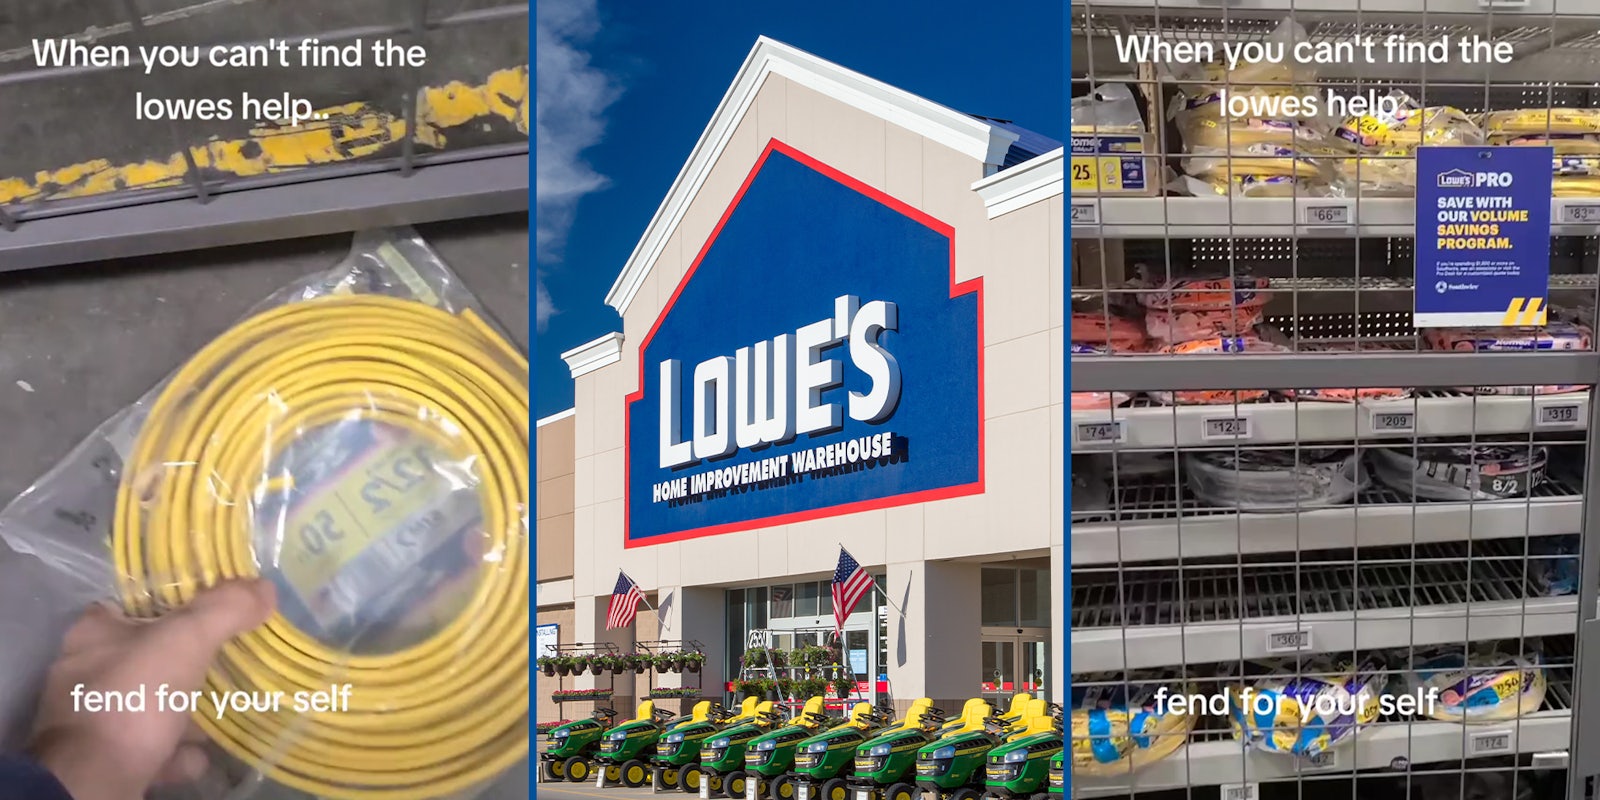 Lowe’s customer says worker never came to unlock item from cage